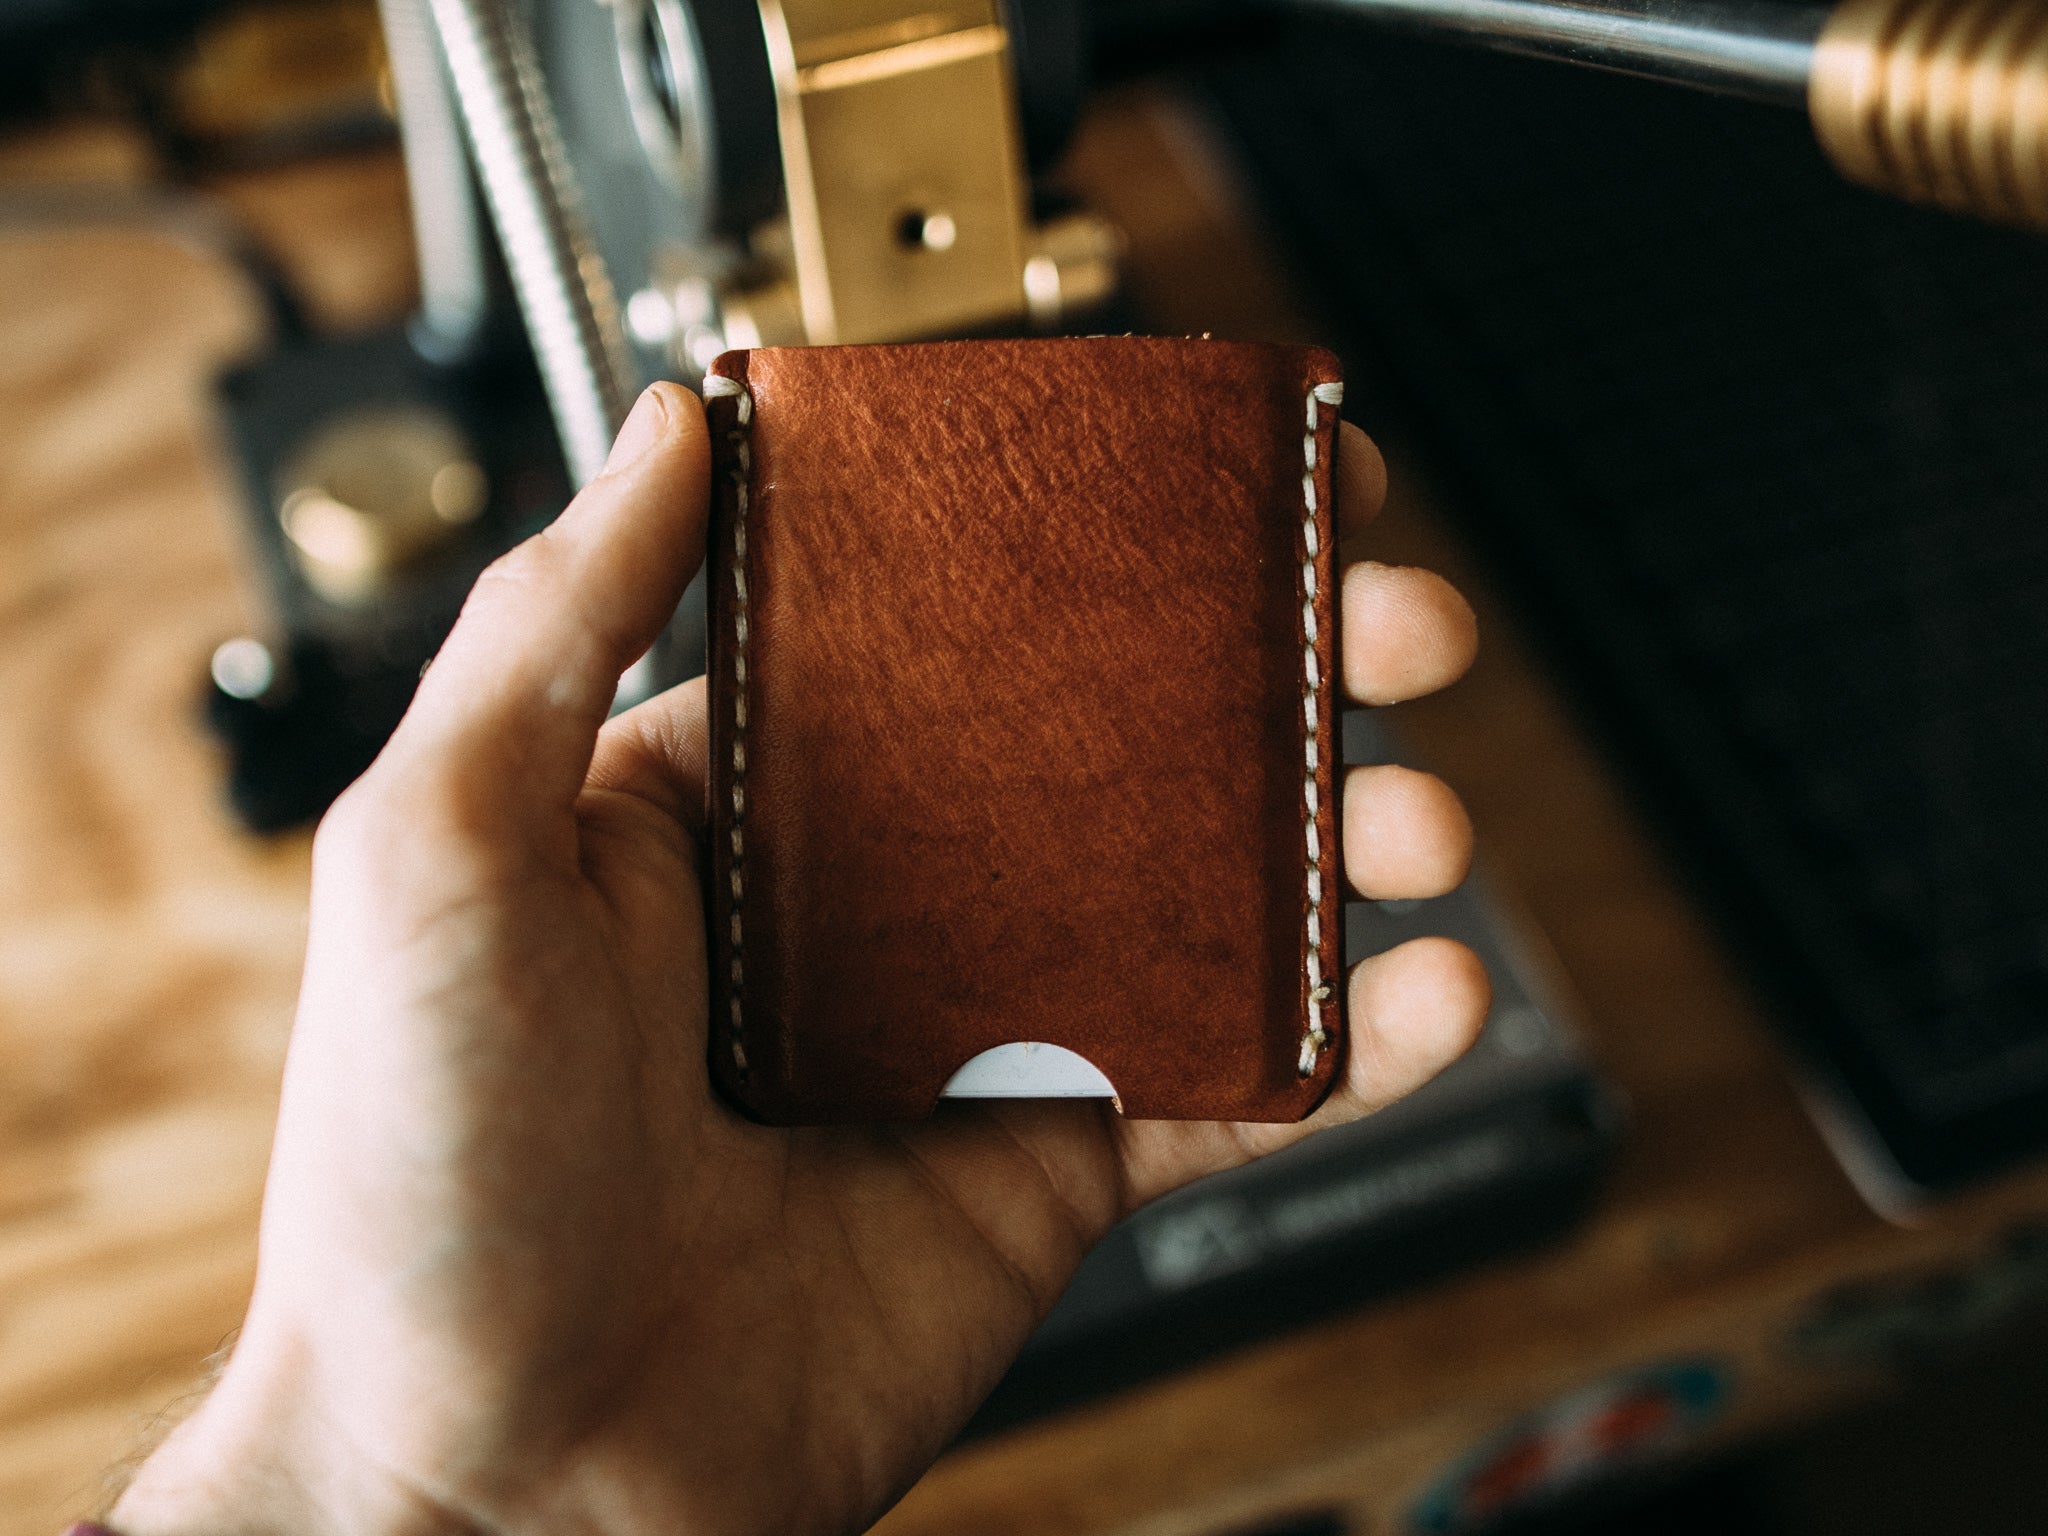 The Roland - Lost Dutchman Leather handmade leather wallets